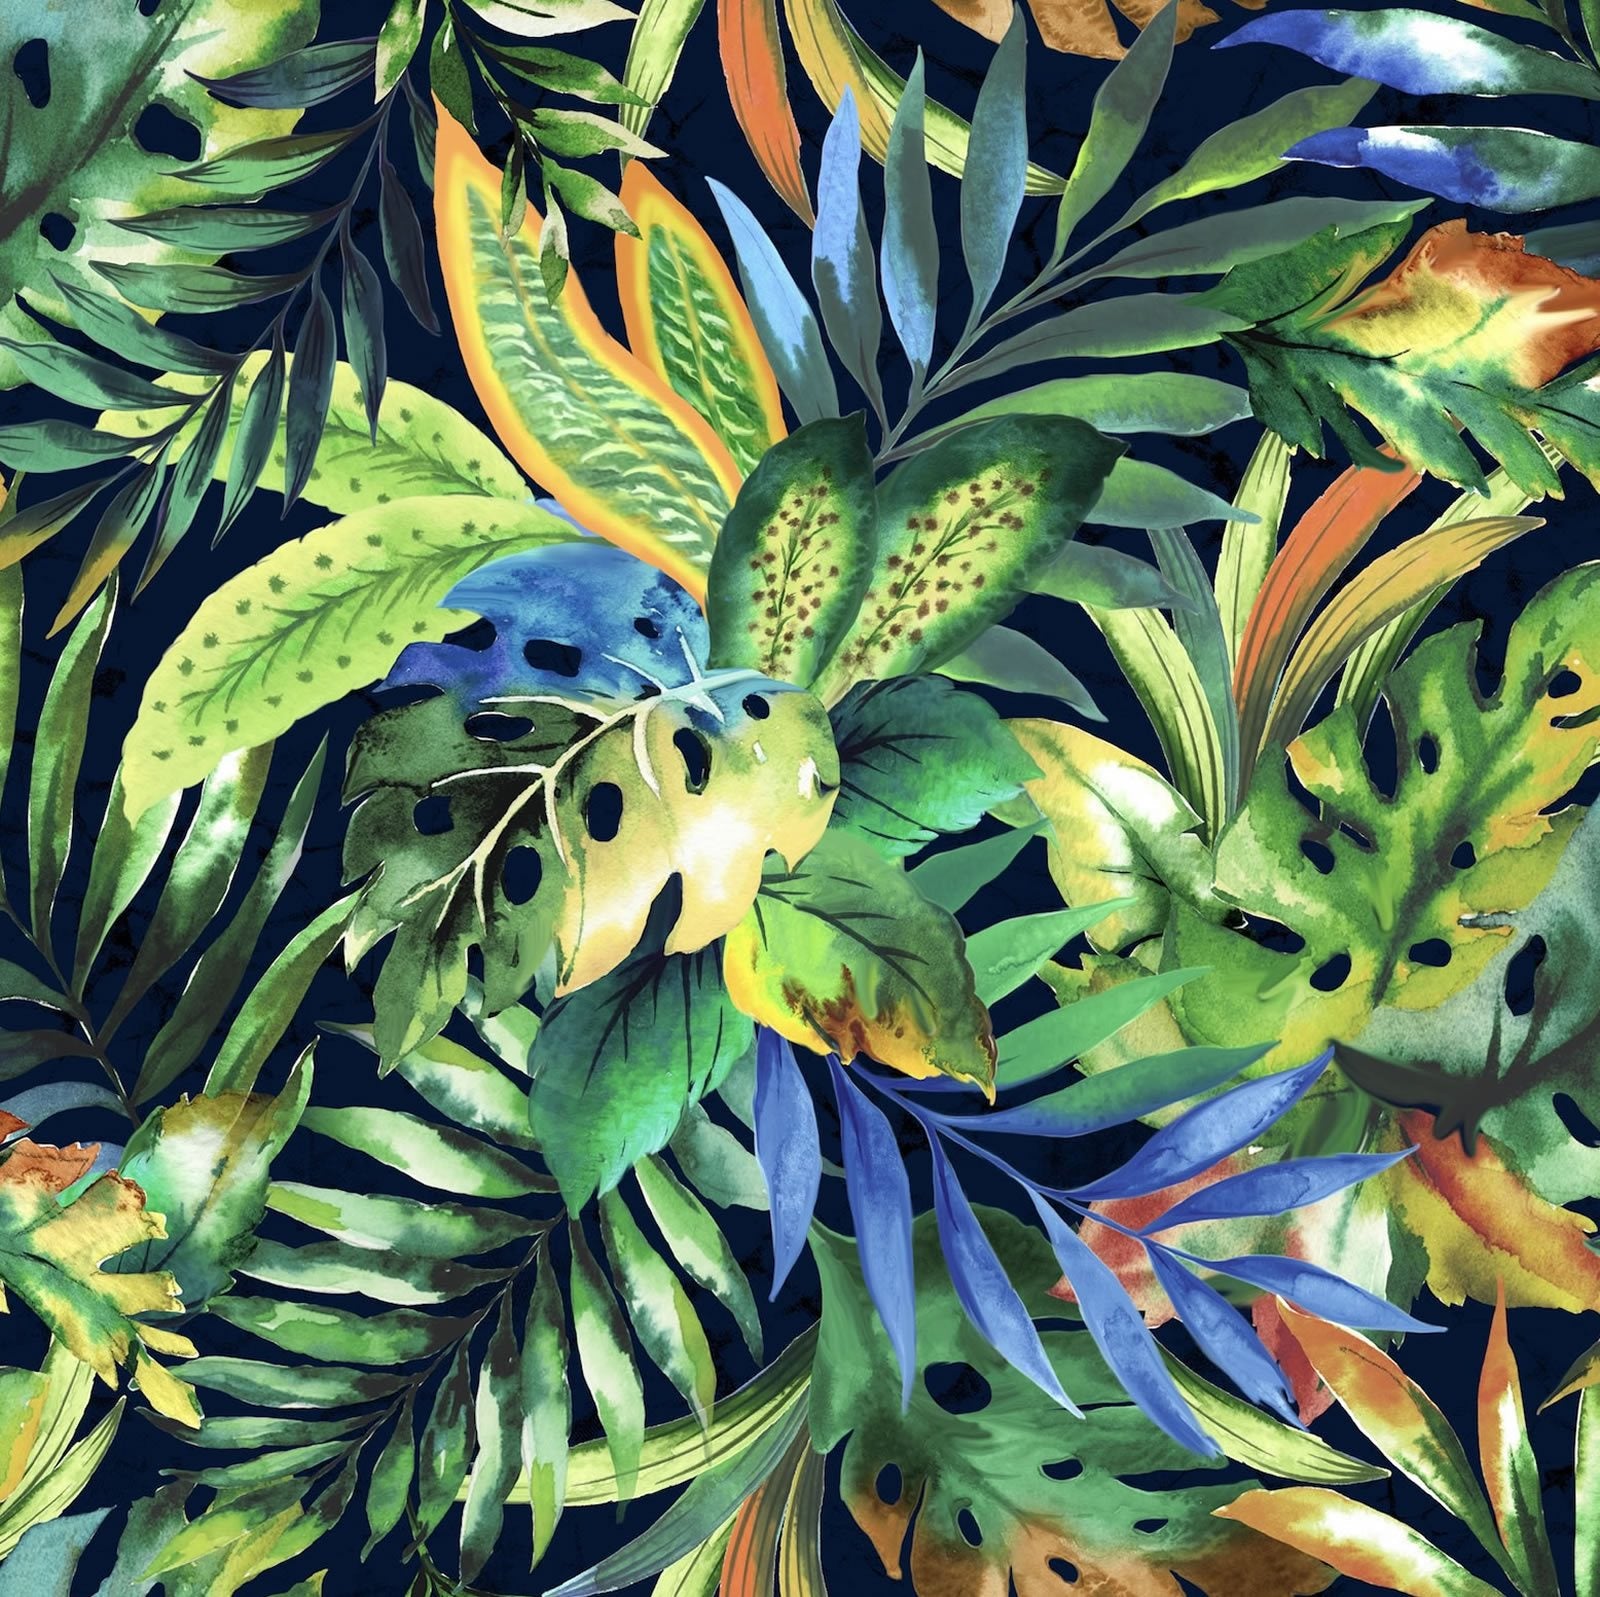 This cotton fabric features brightly-colored images of tropical leaves such as ferns and banana leaves on a black background.Available at Colorado Creations Quilting 